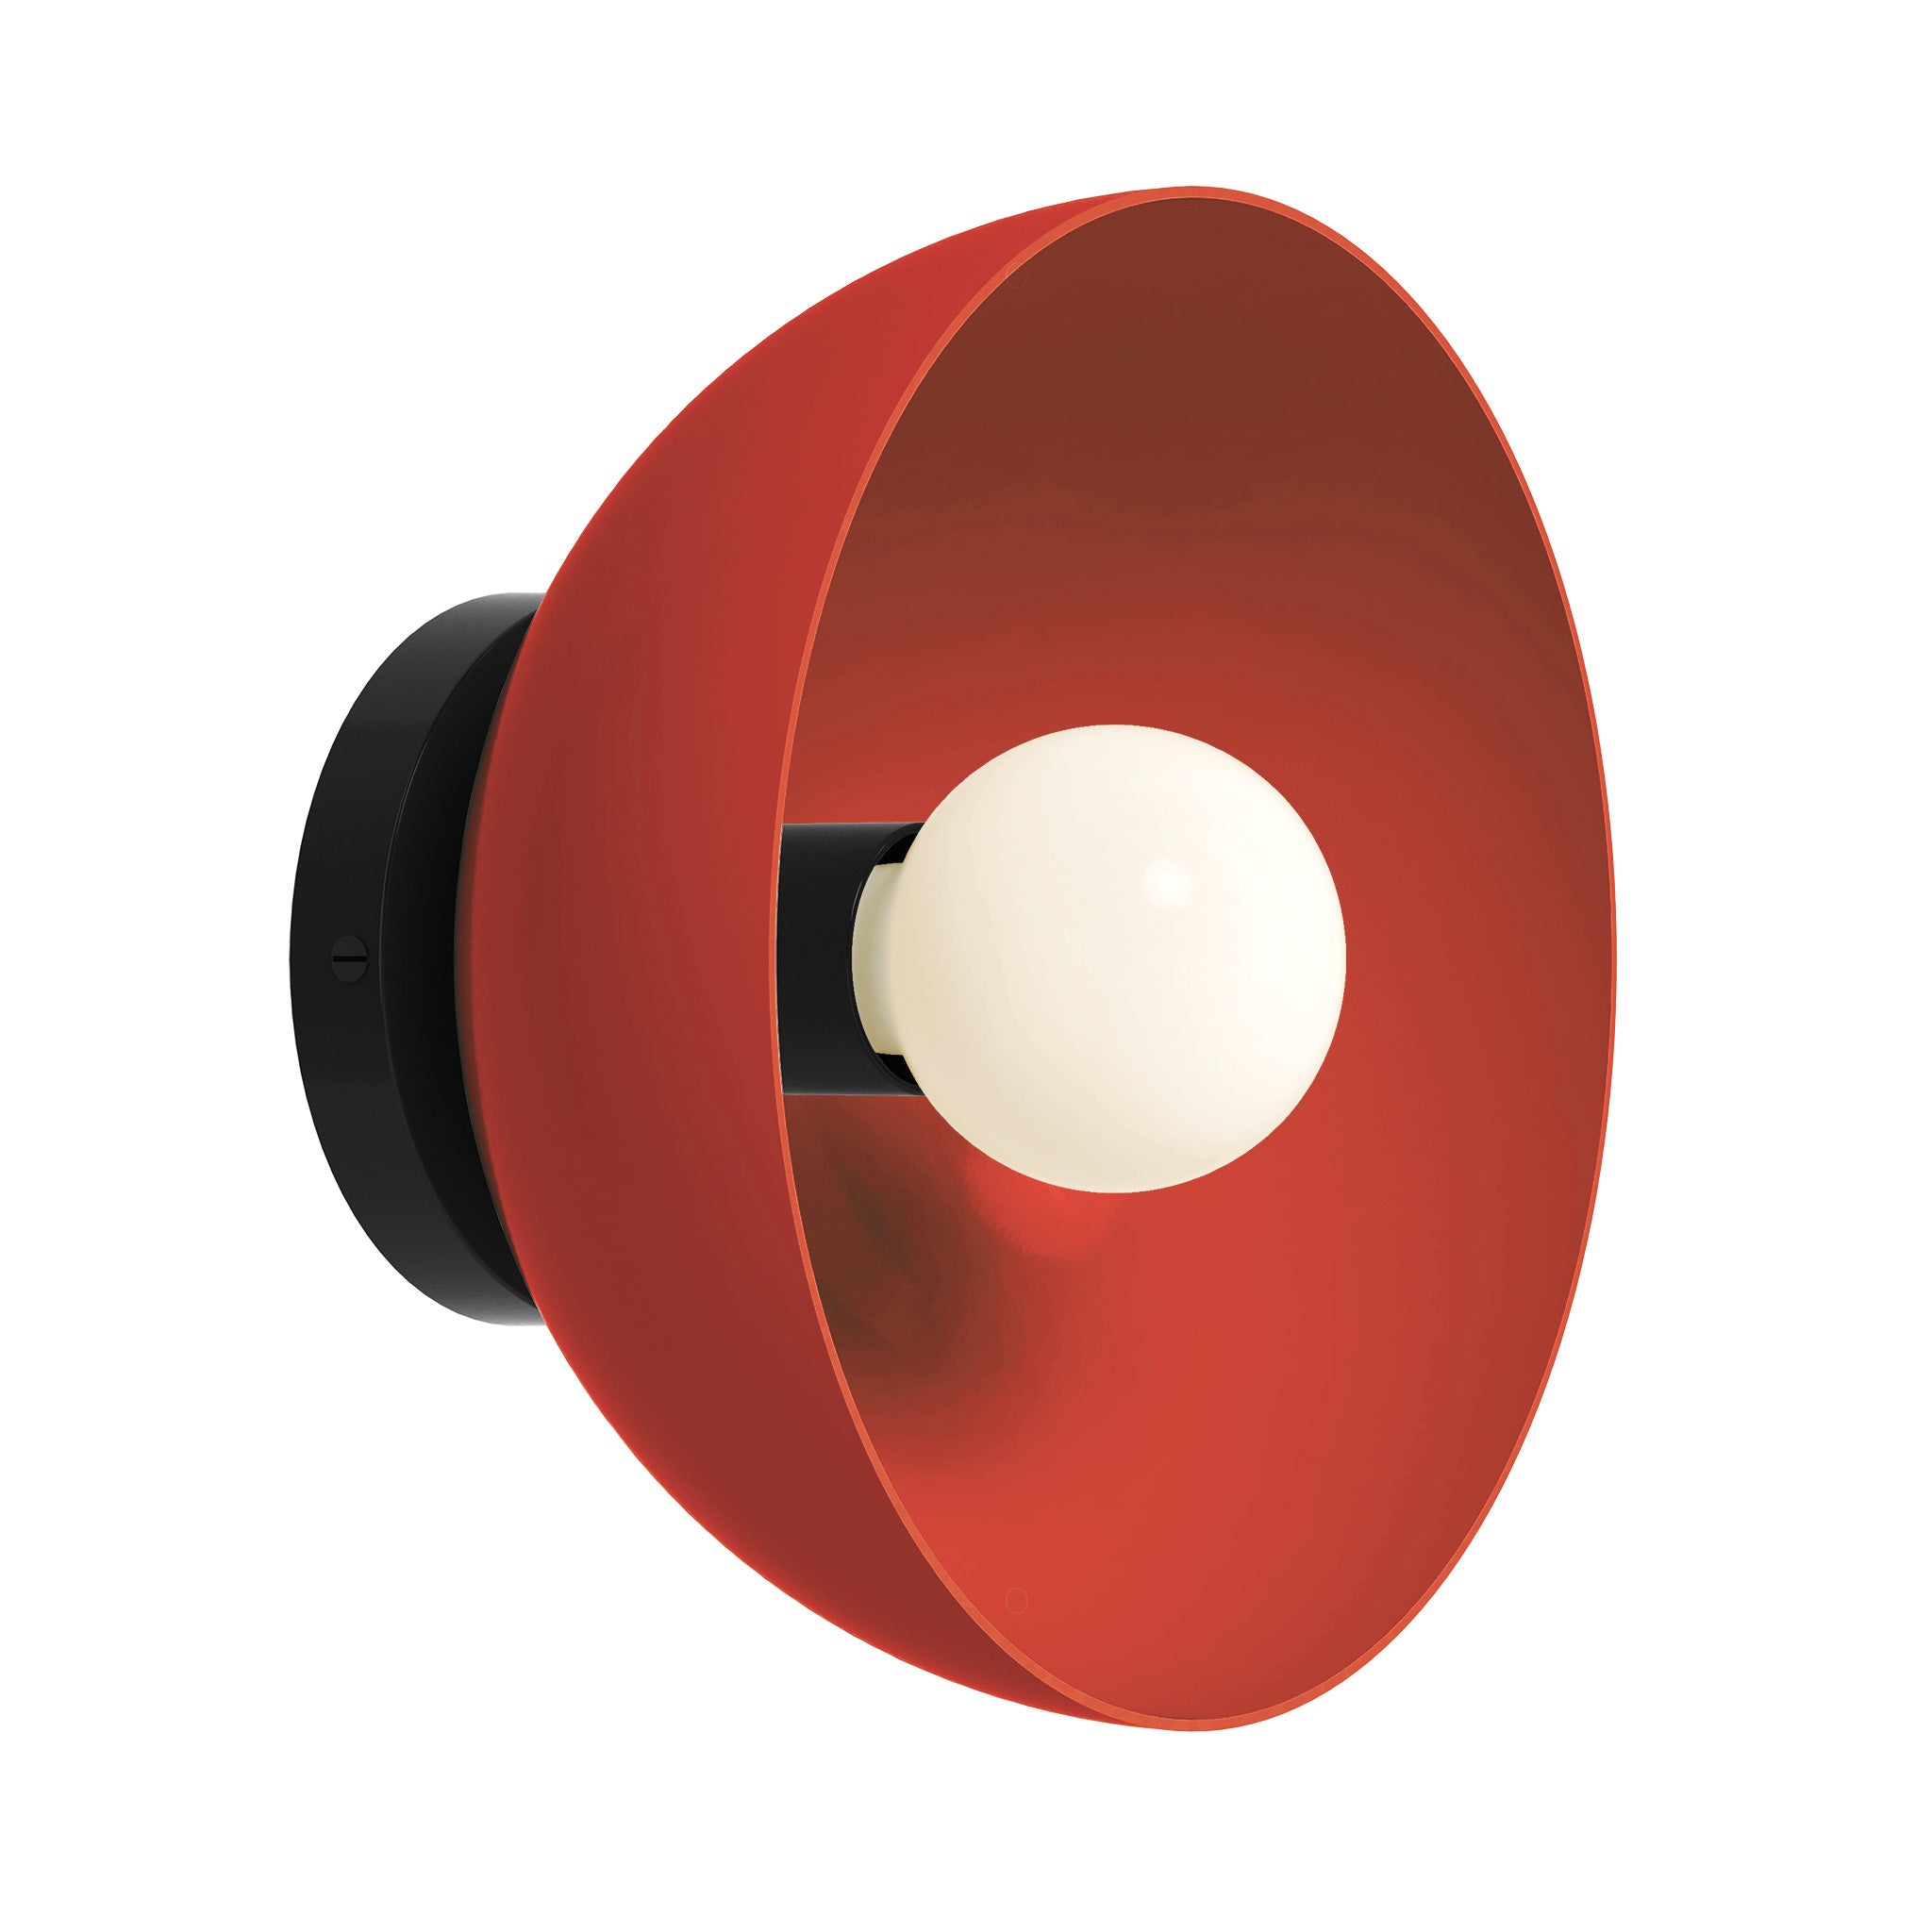 Black and riding hood red color hemi dome sconce 10" Dutton Brown lighting